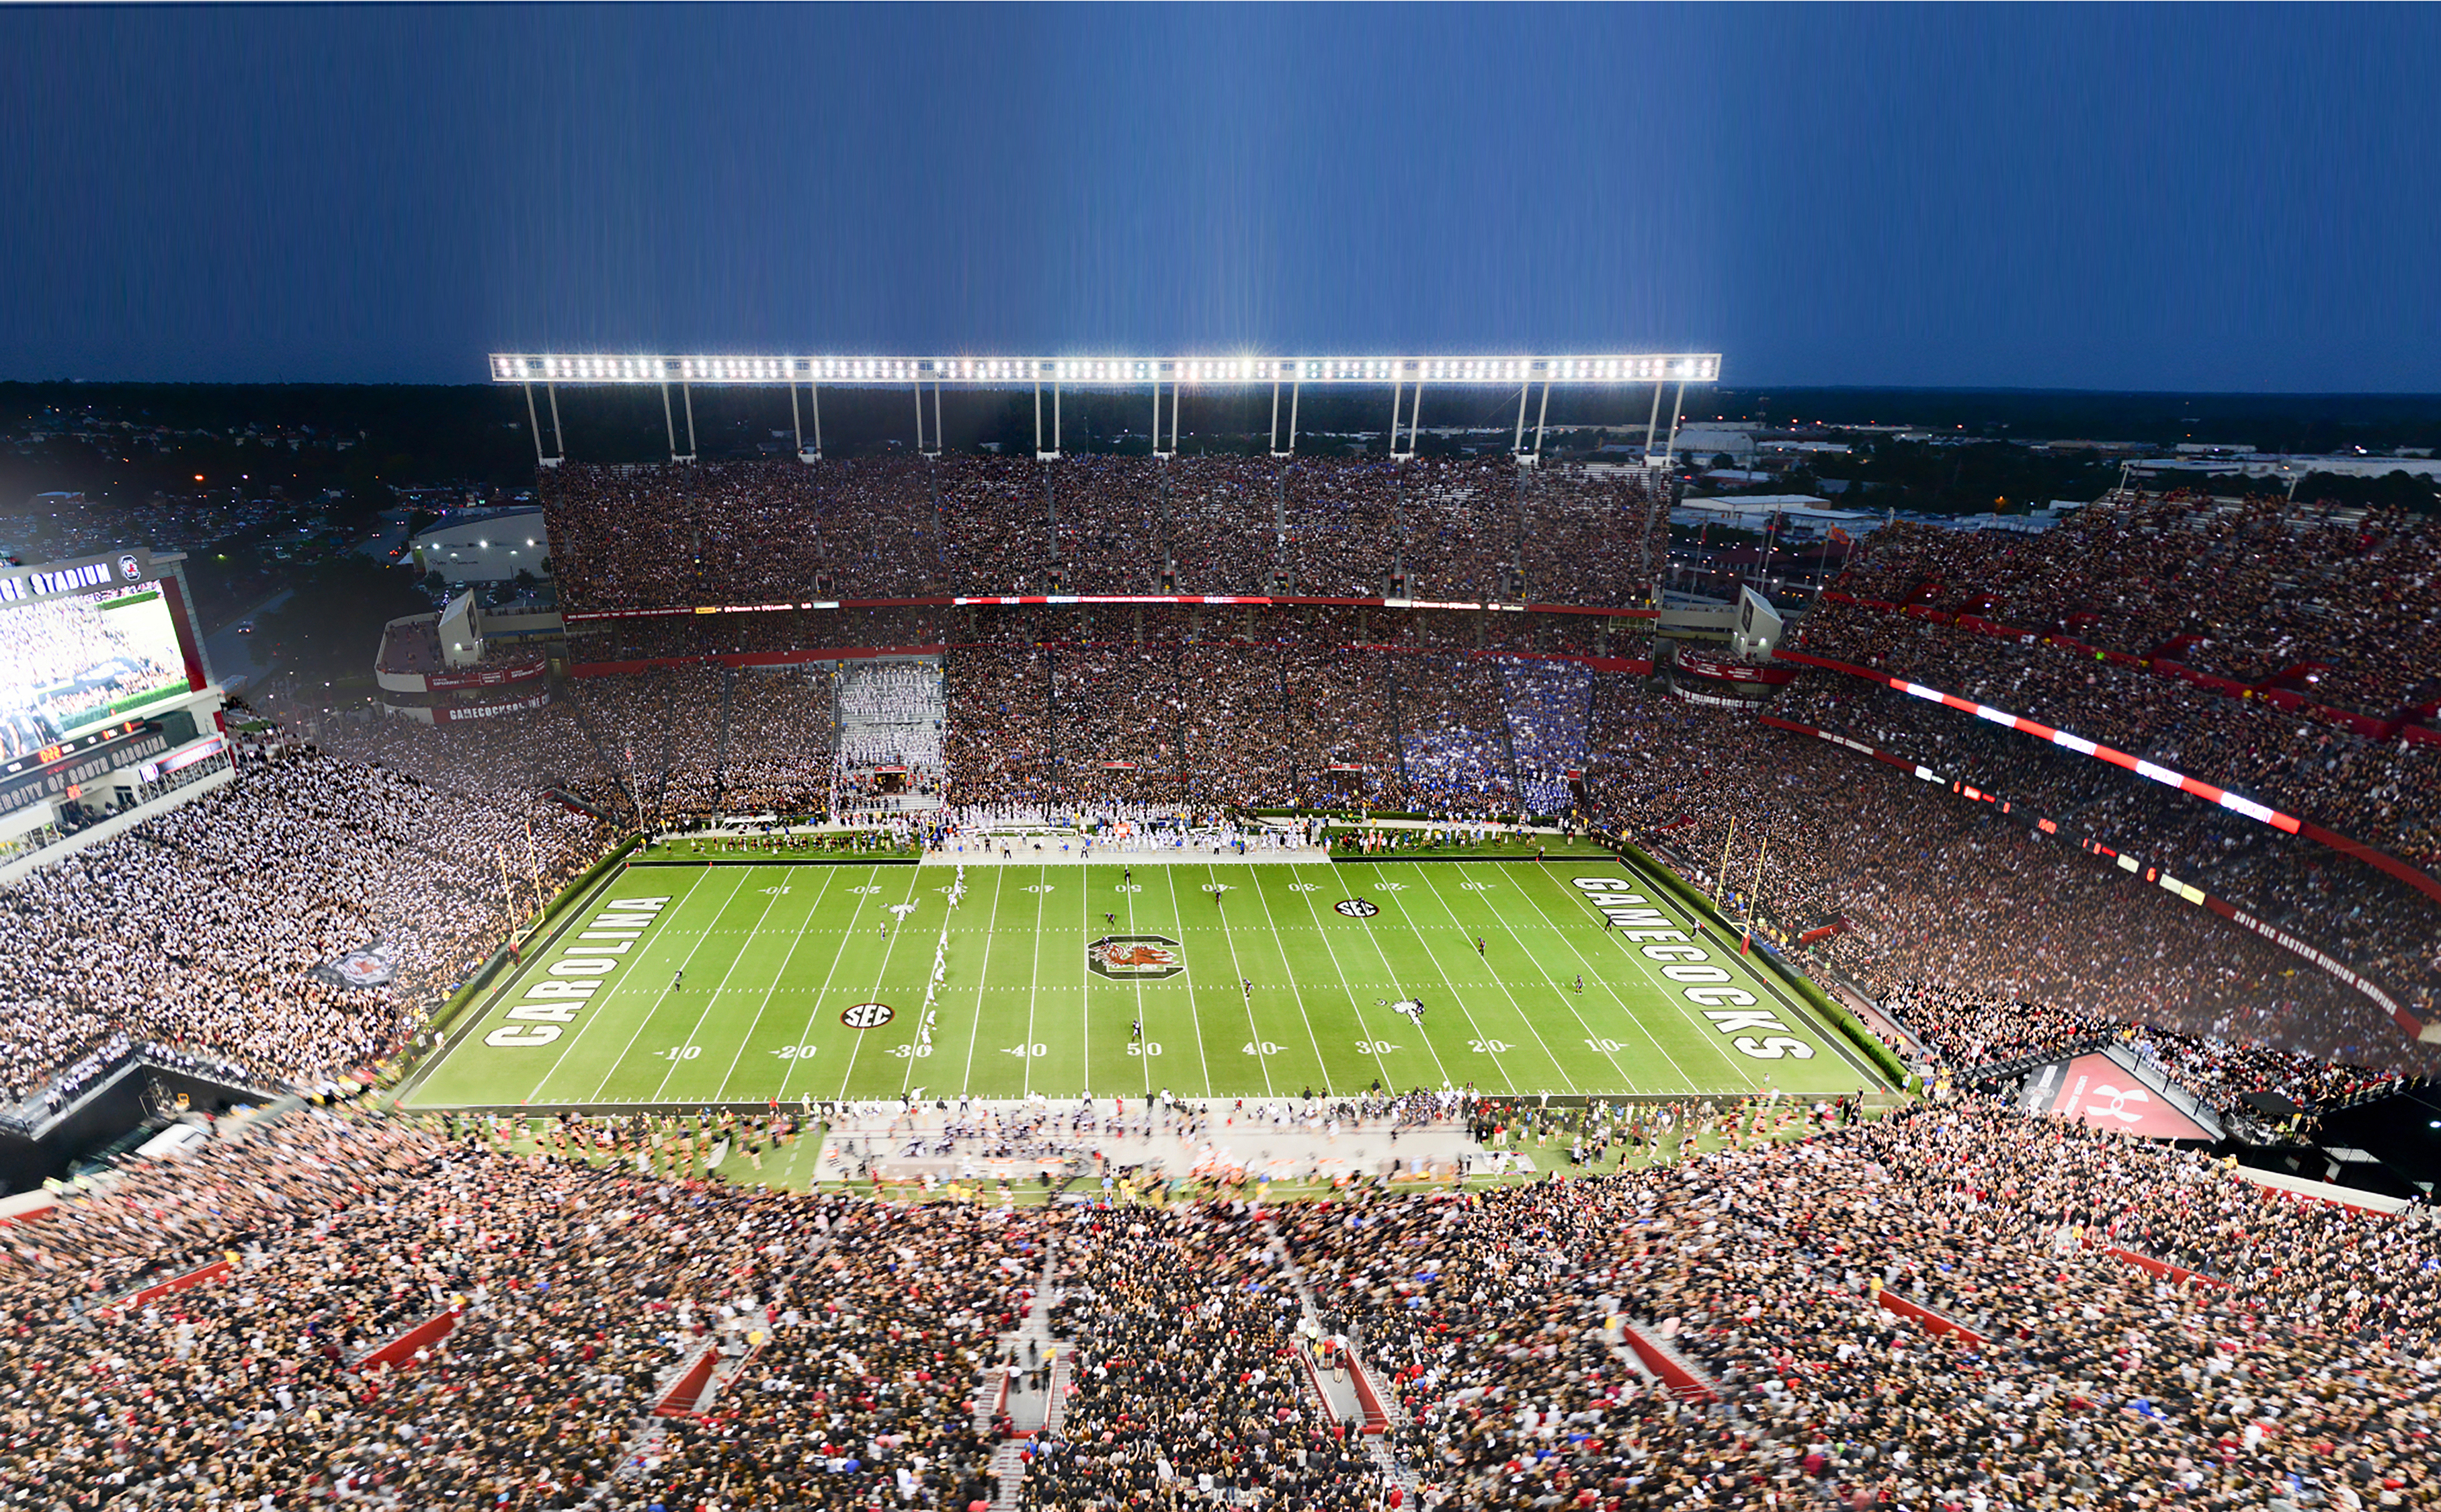 Close to 85,000 people are in Williams-Brice Stadium on any given game day at kick off! This includes players, fans, concession workers, and television crews. Every year, new parking passes are designed for 32 various types of parking. Jim Petrus, who has worked for 40 years with USC athletics, says planning for the August kickoff begins in May. Jim is responsible for overseeing and coordinating grounds crews, the highway patrol, a 100-plus-member parking crew and more. Photography courtesy of USC Athletics